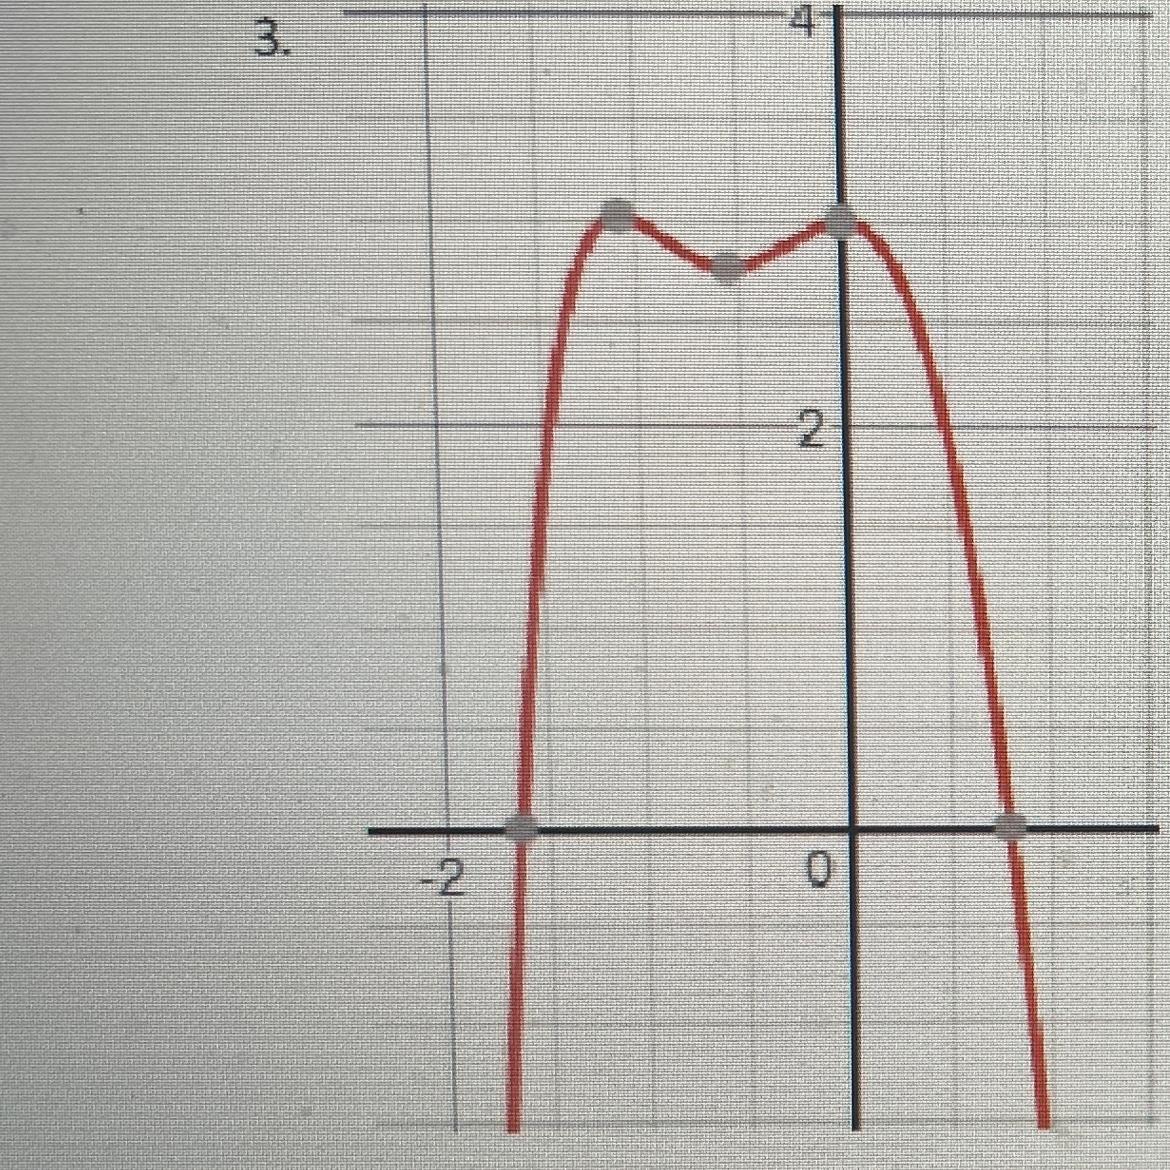 What Is The Maximum Value Of This Function On The Interval [-2,0]